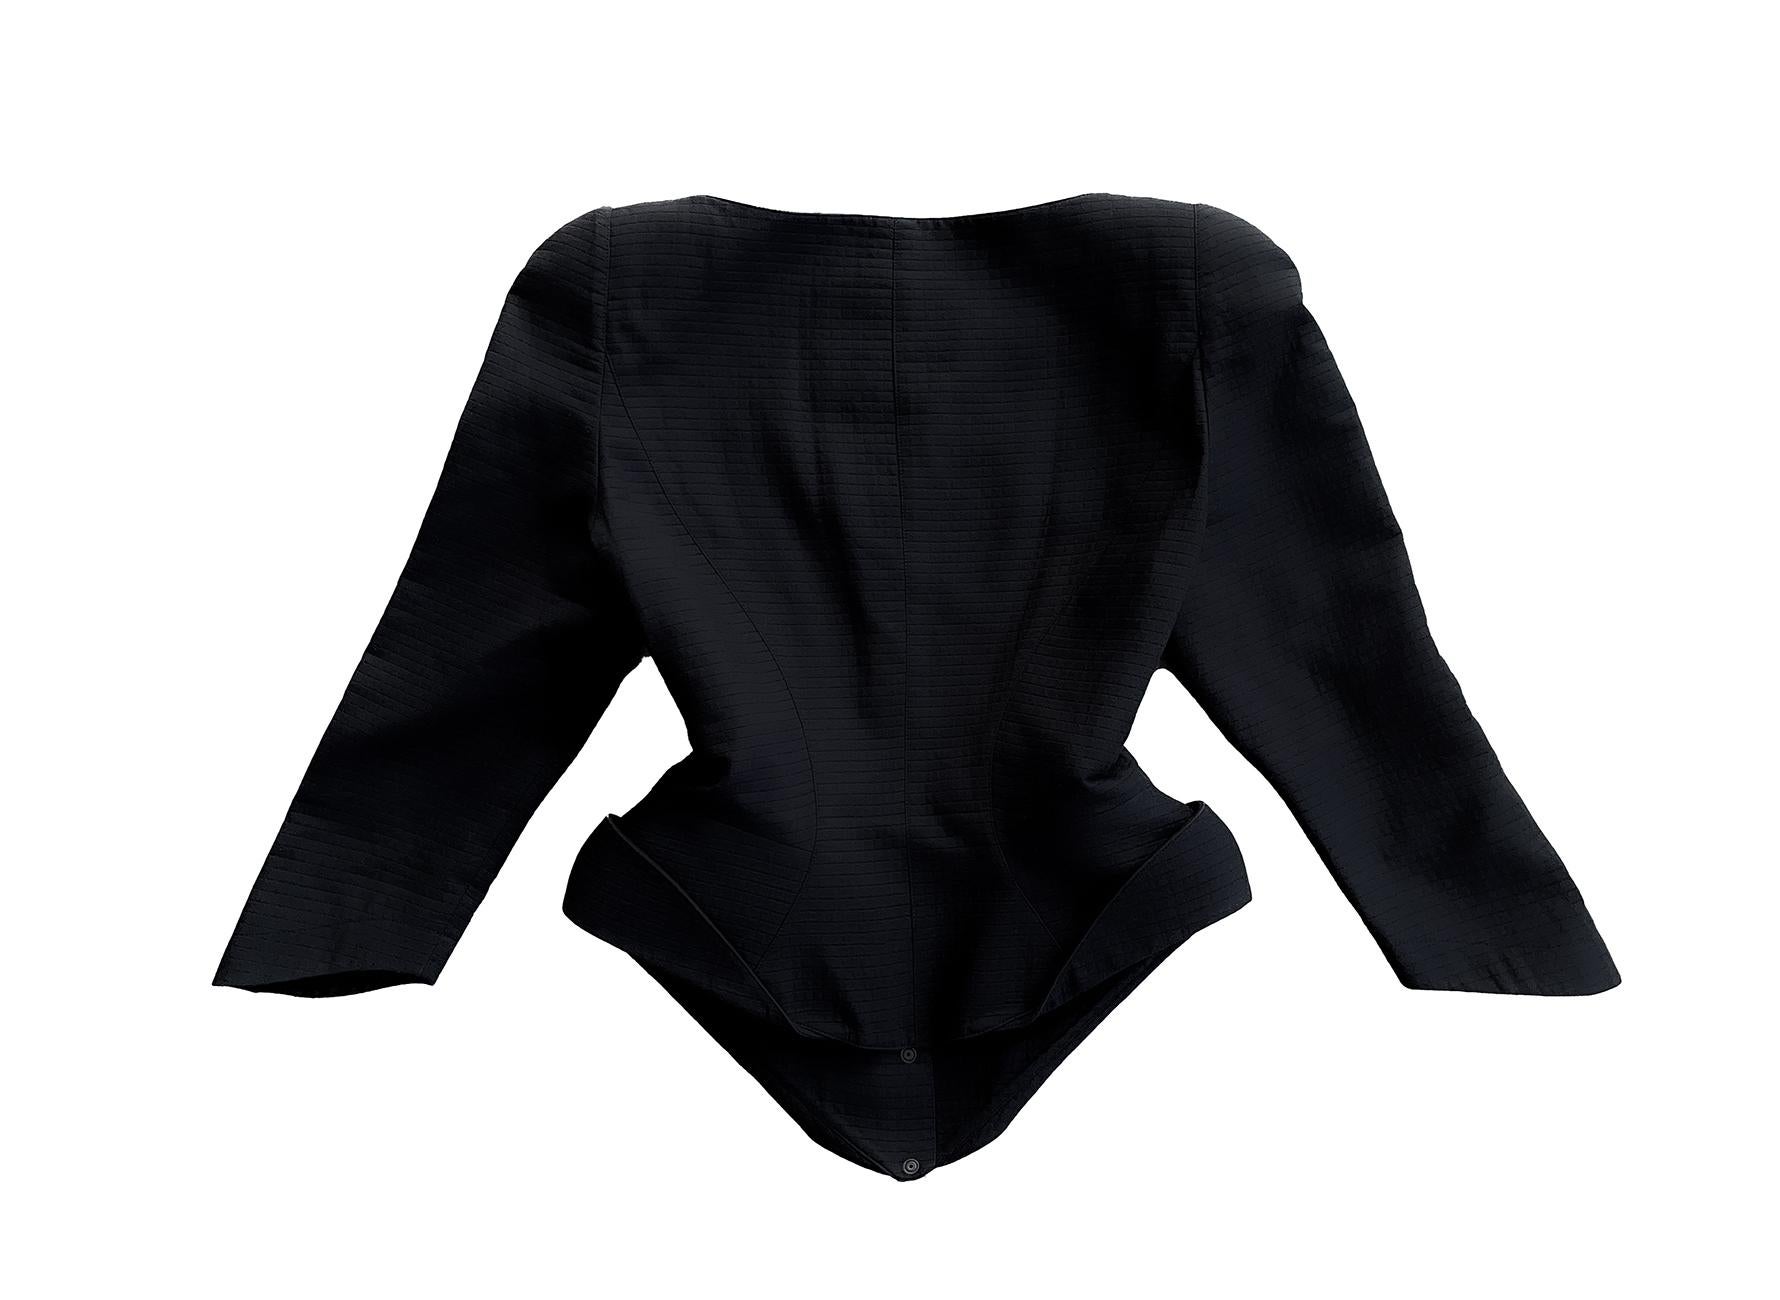 Thierry Mugler 1989 Dramatic Sculptural  Avant- Garde Jacket Top For Sale 1